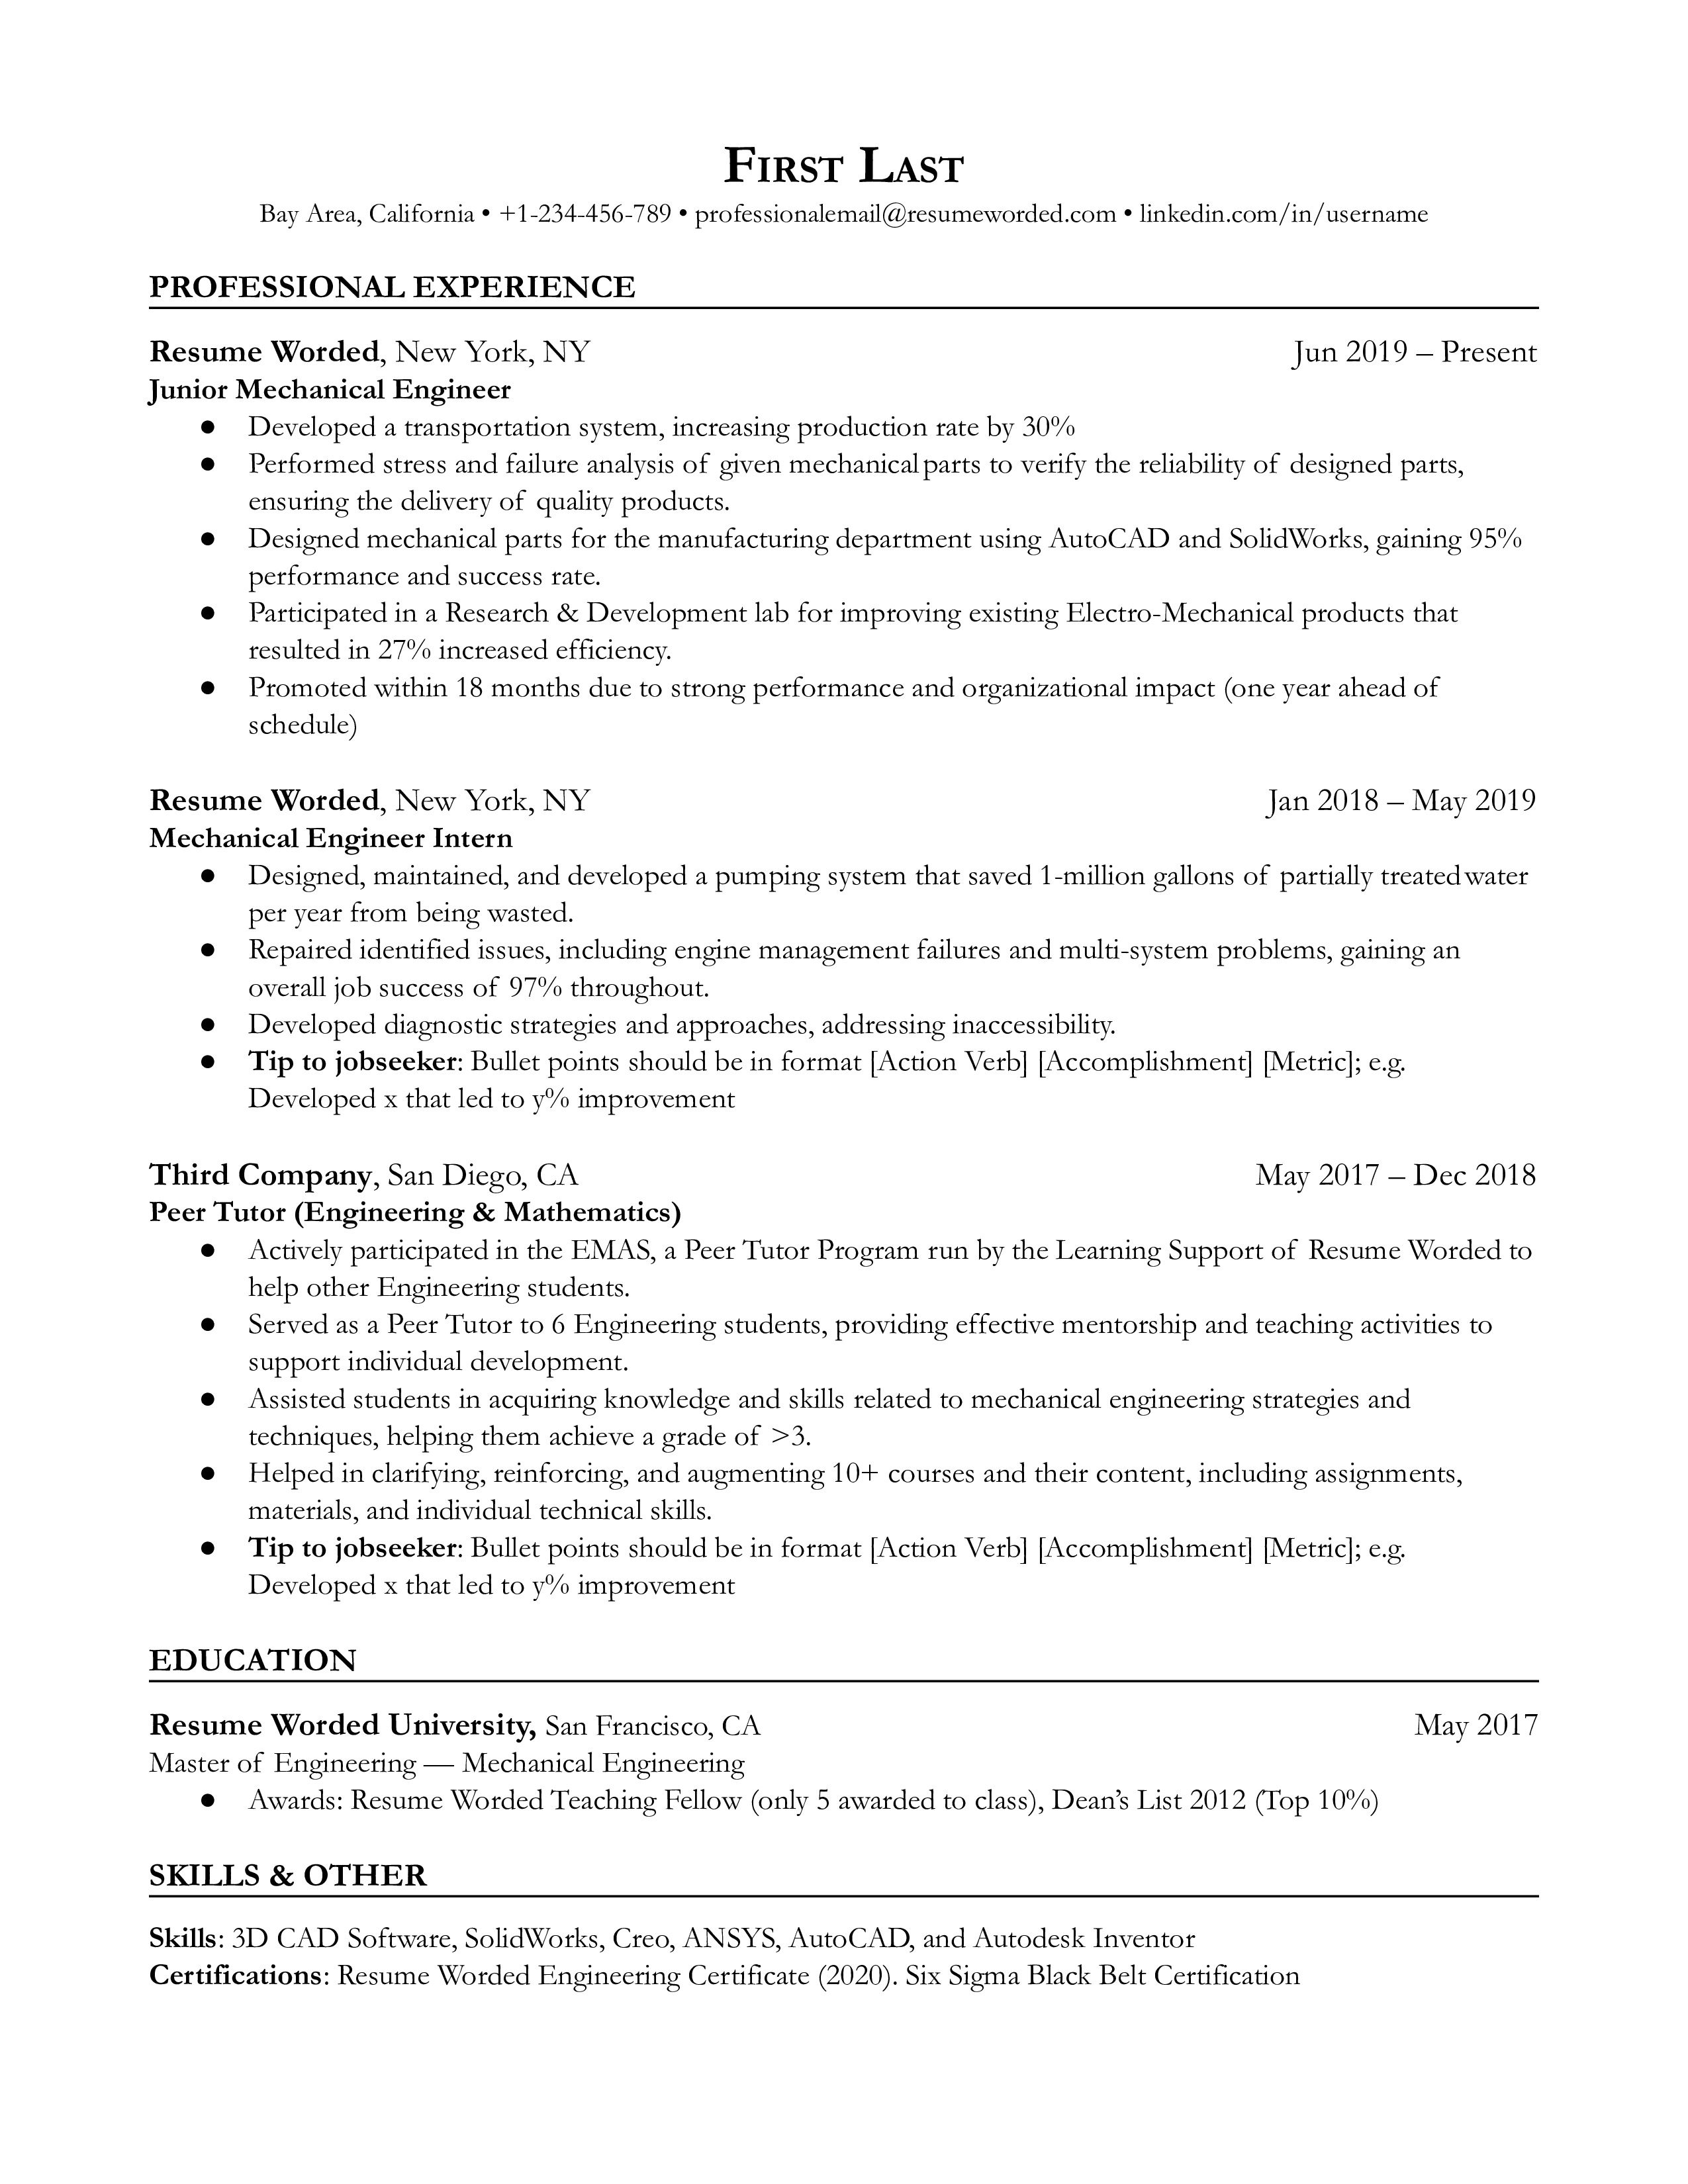 Junior mechanical engineer resume with relevant internships, extracurricular activities, and educational history